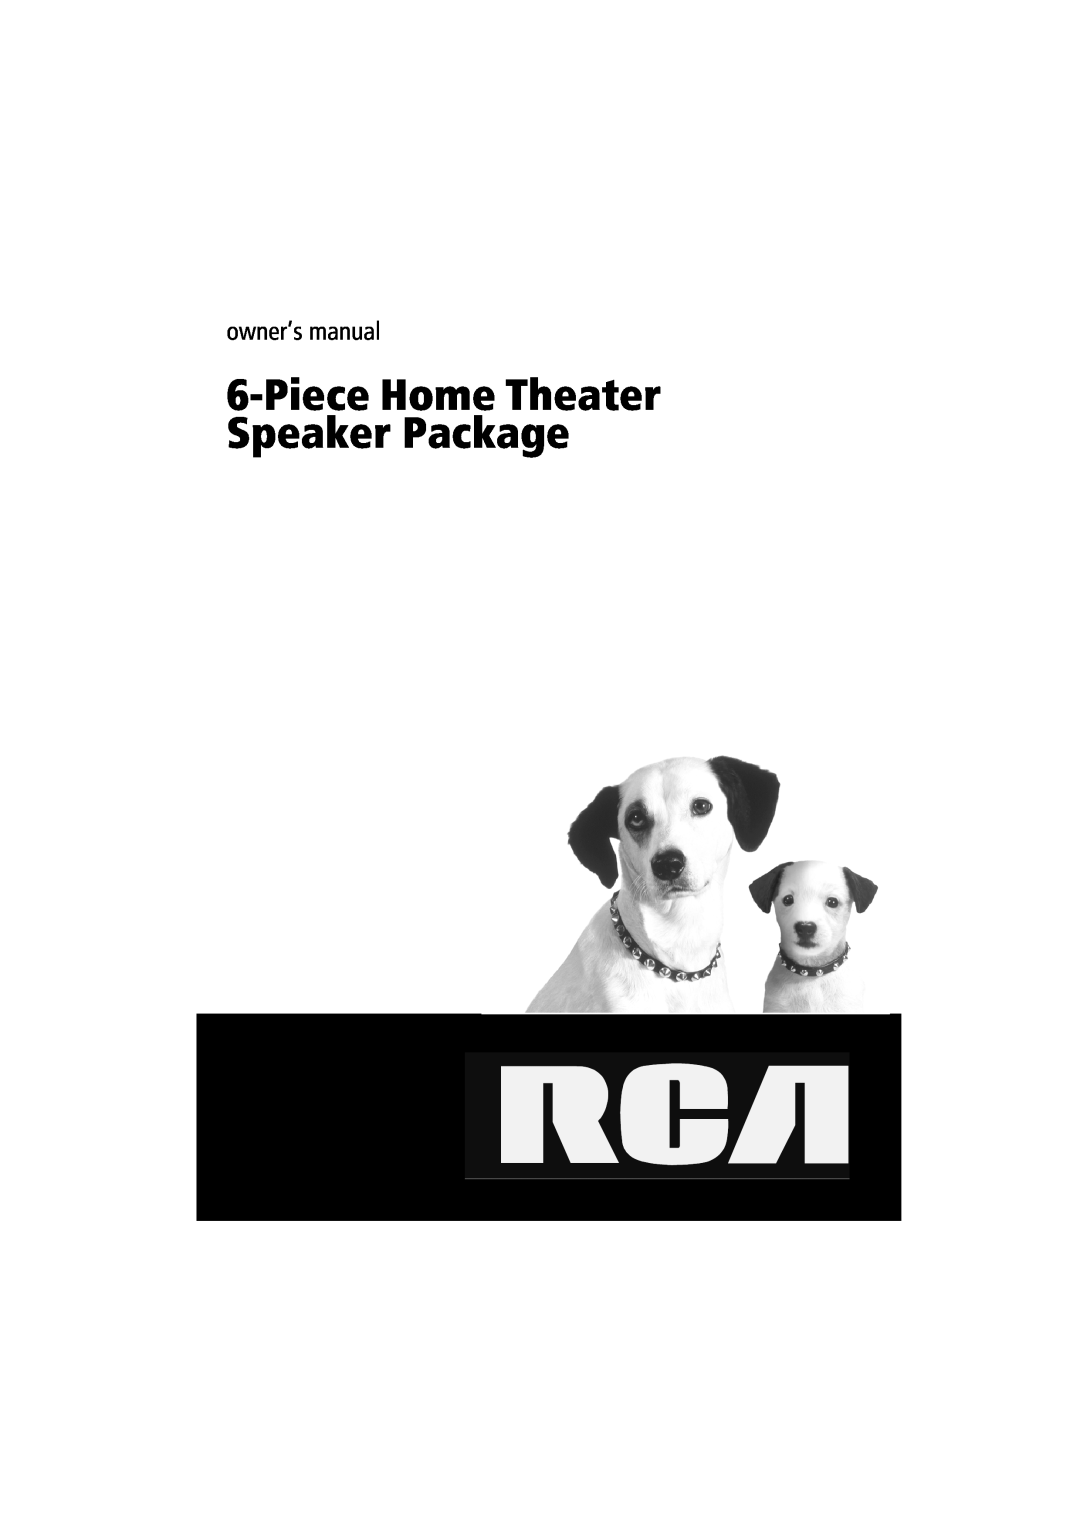 RCA 6-Piece Home Theater Speaker Package owner manual PieceHome Theater Speaker Package 